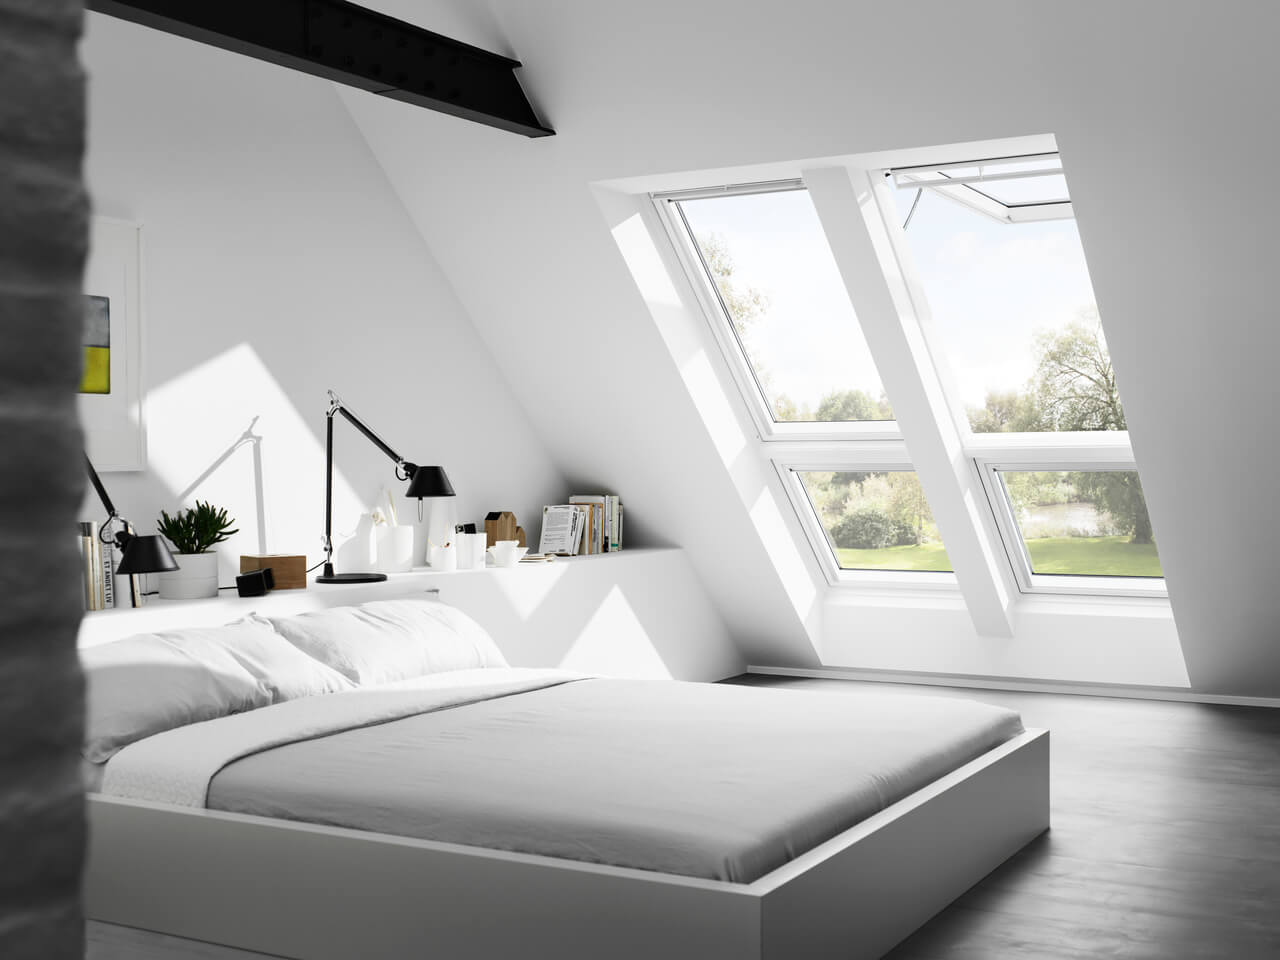 Modern attic bedroom with VELUX roof windows and minimalist decor.